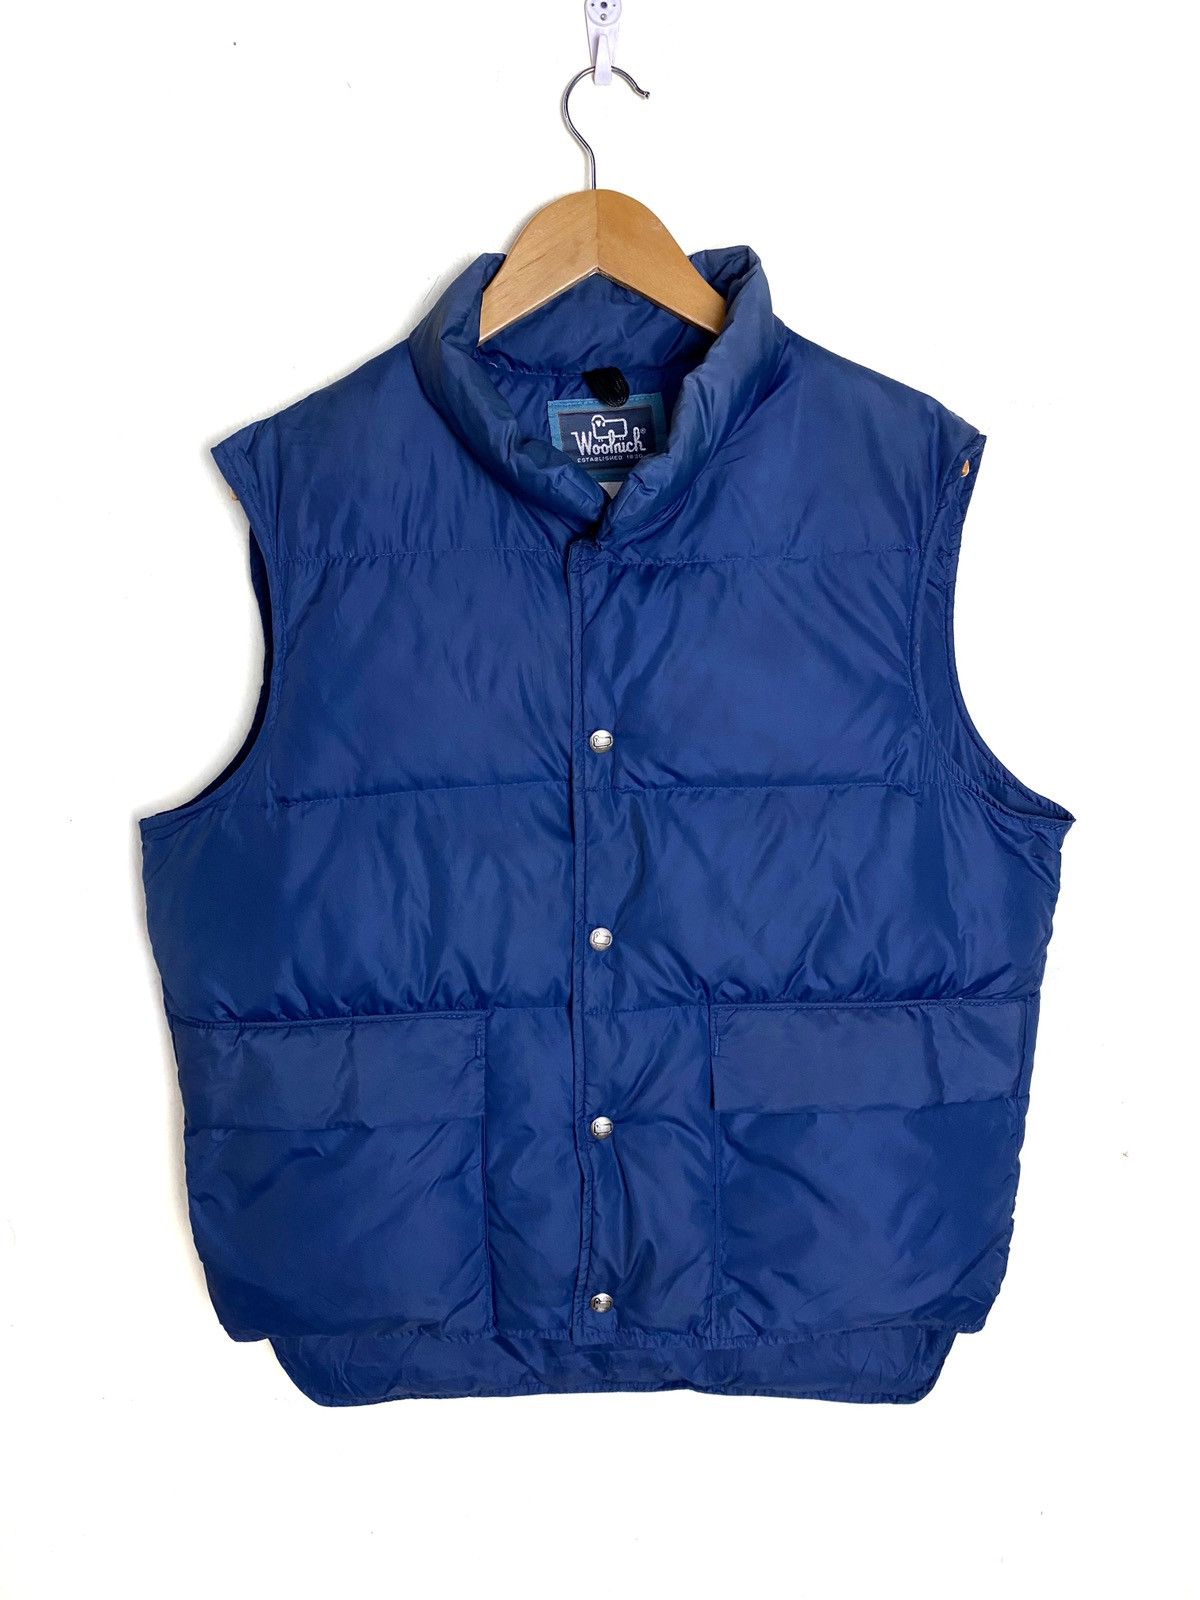 Woolrich Distressed Fly Fishing Vest in Rare Colorway [vintage, large]